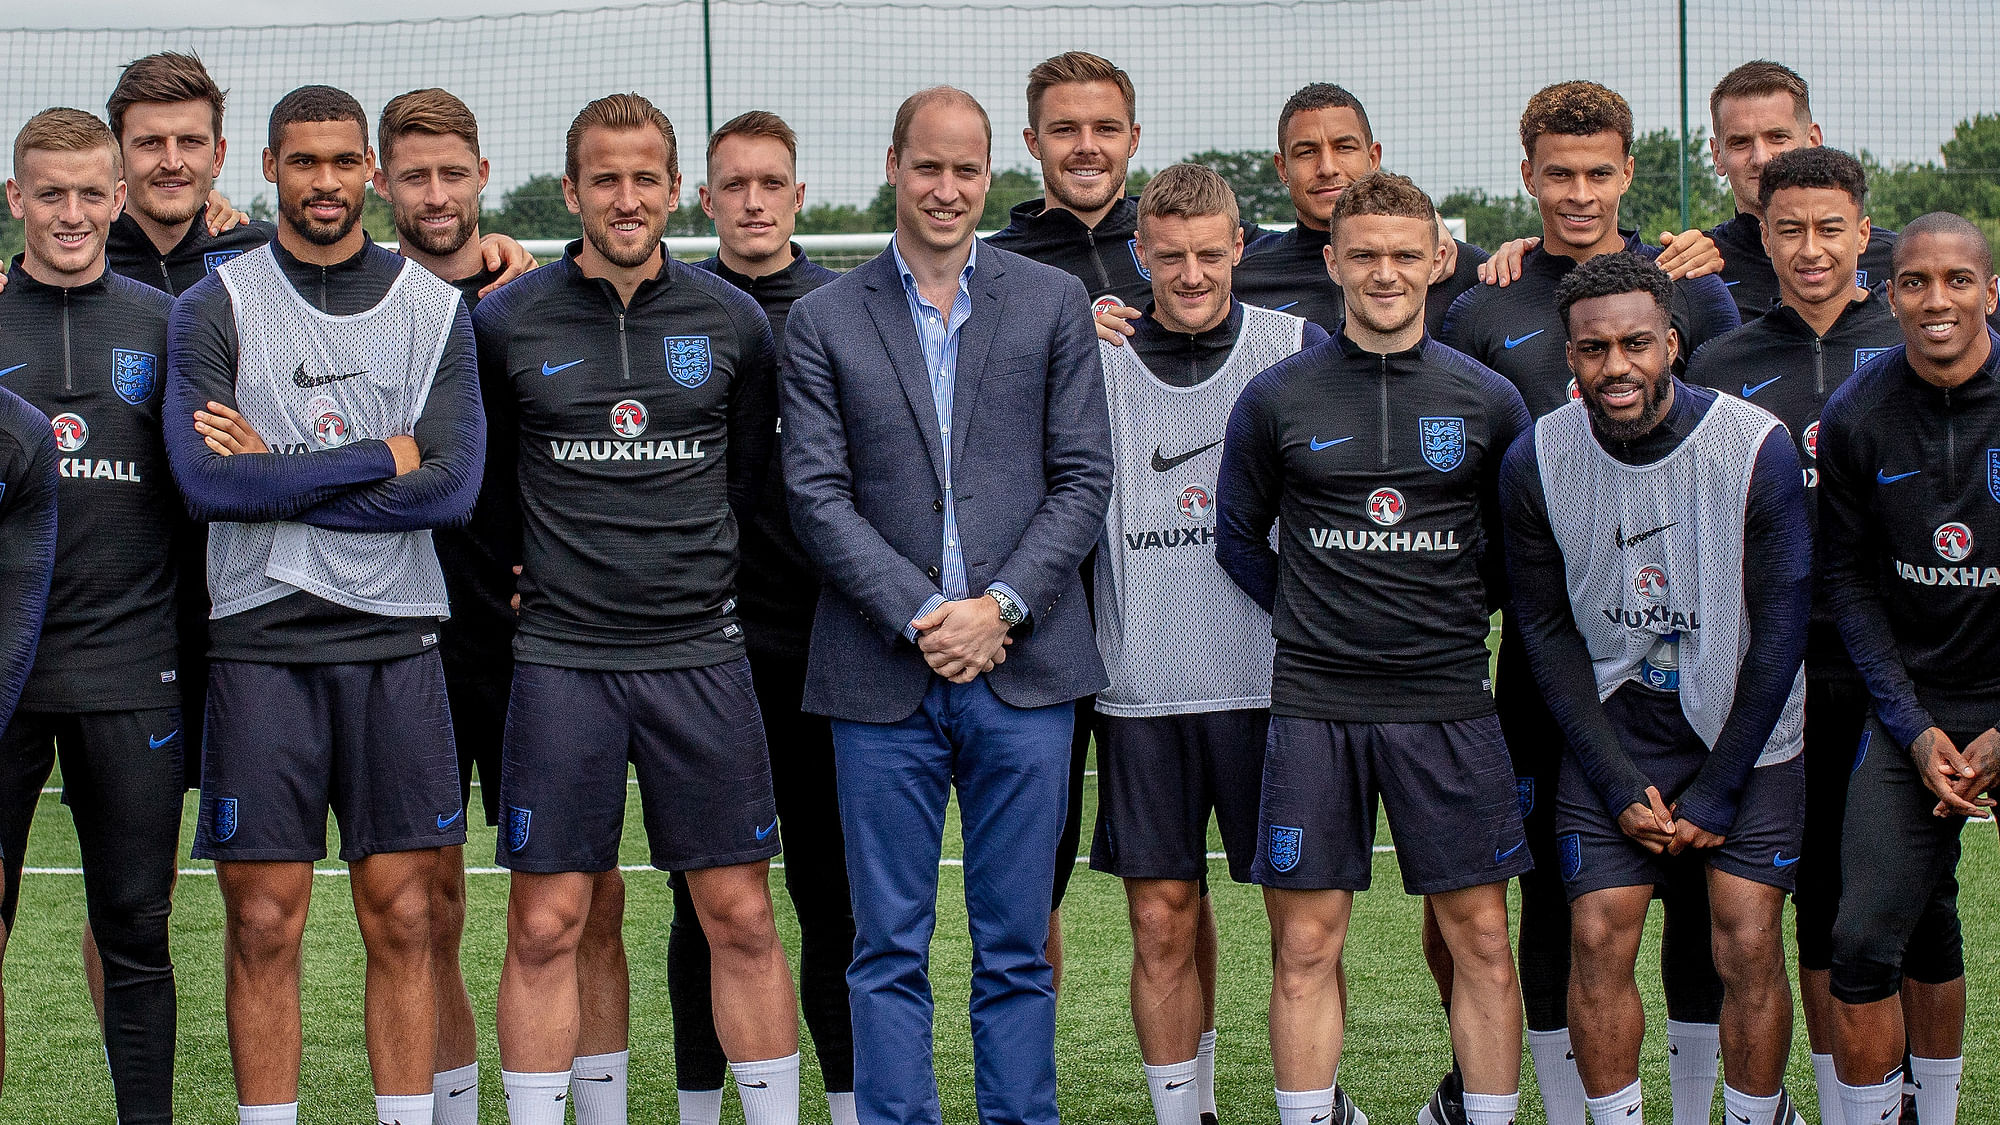 The English football team with Prince William during a training session in England ahead of the 2018 FIFA World Cup.